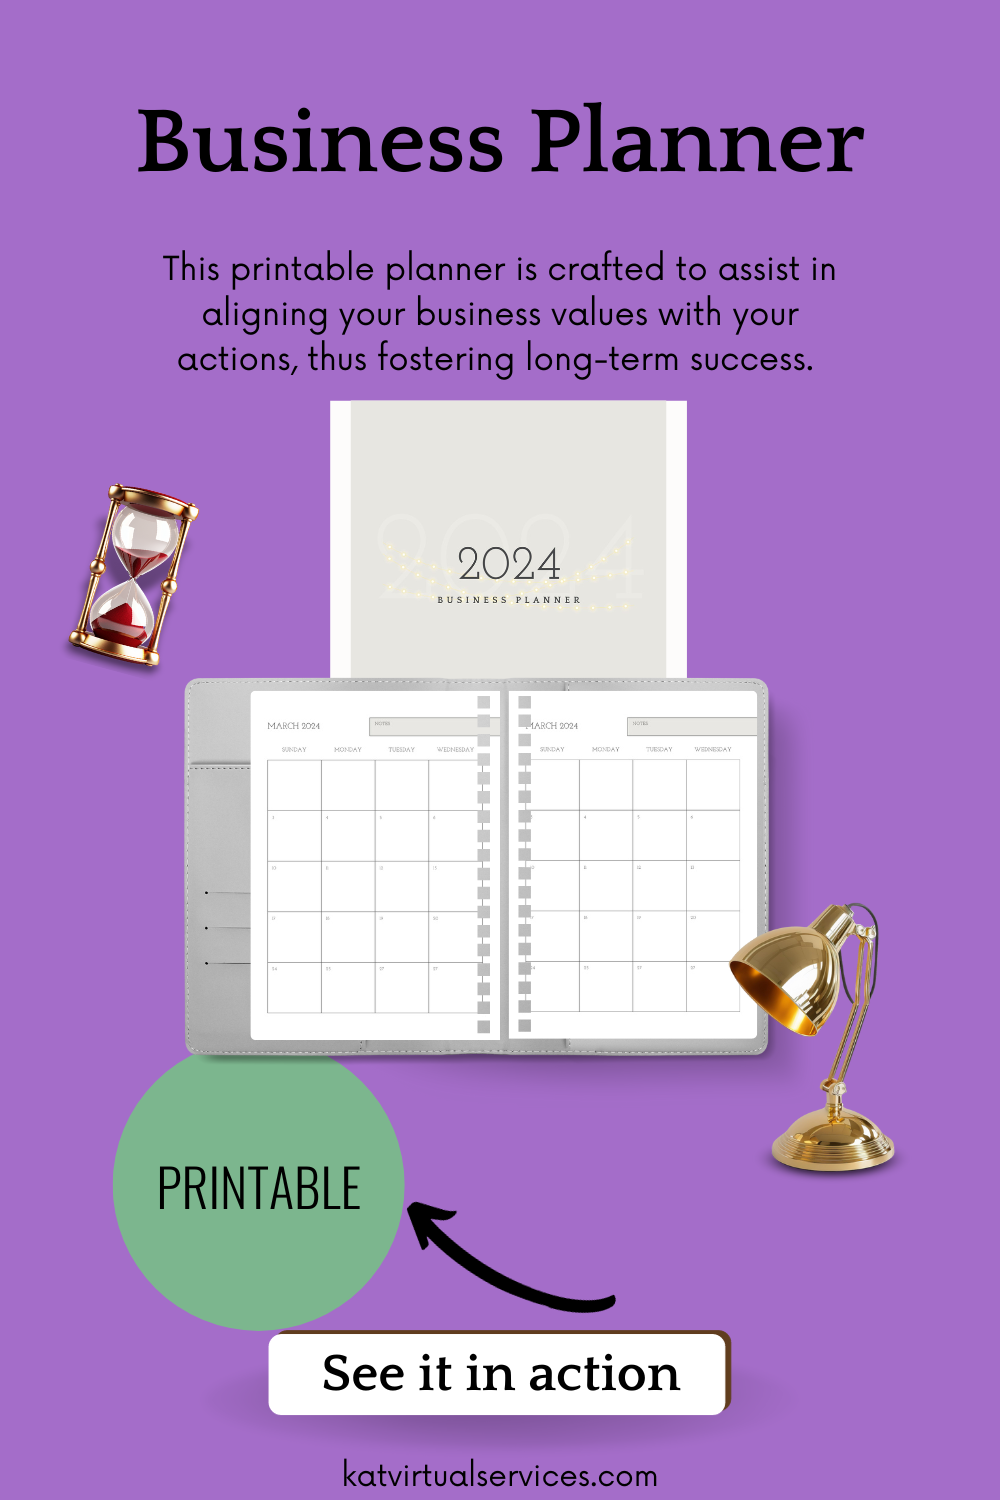 2024 Core Values Business Planner! Printable, Daily Version